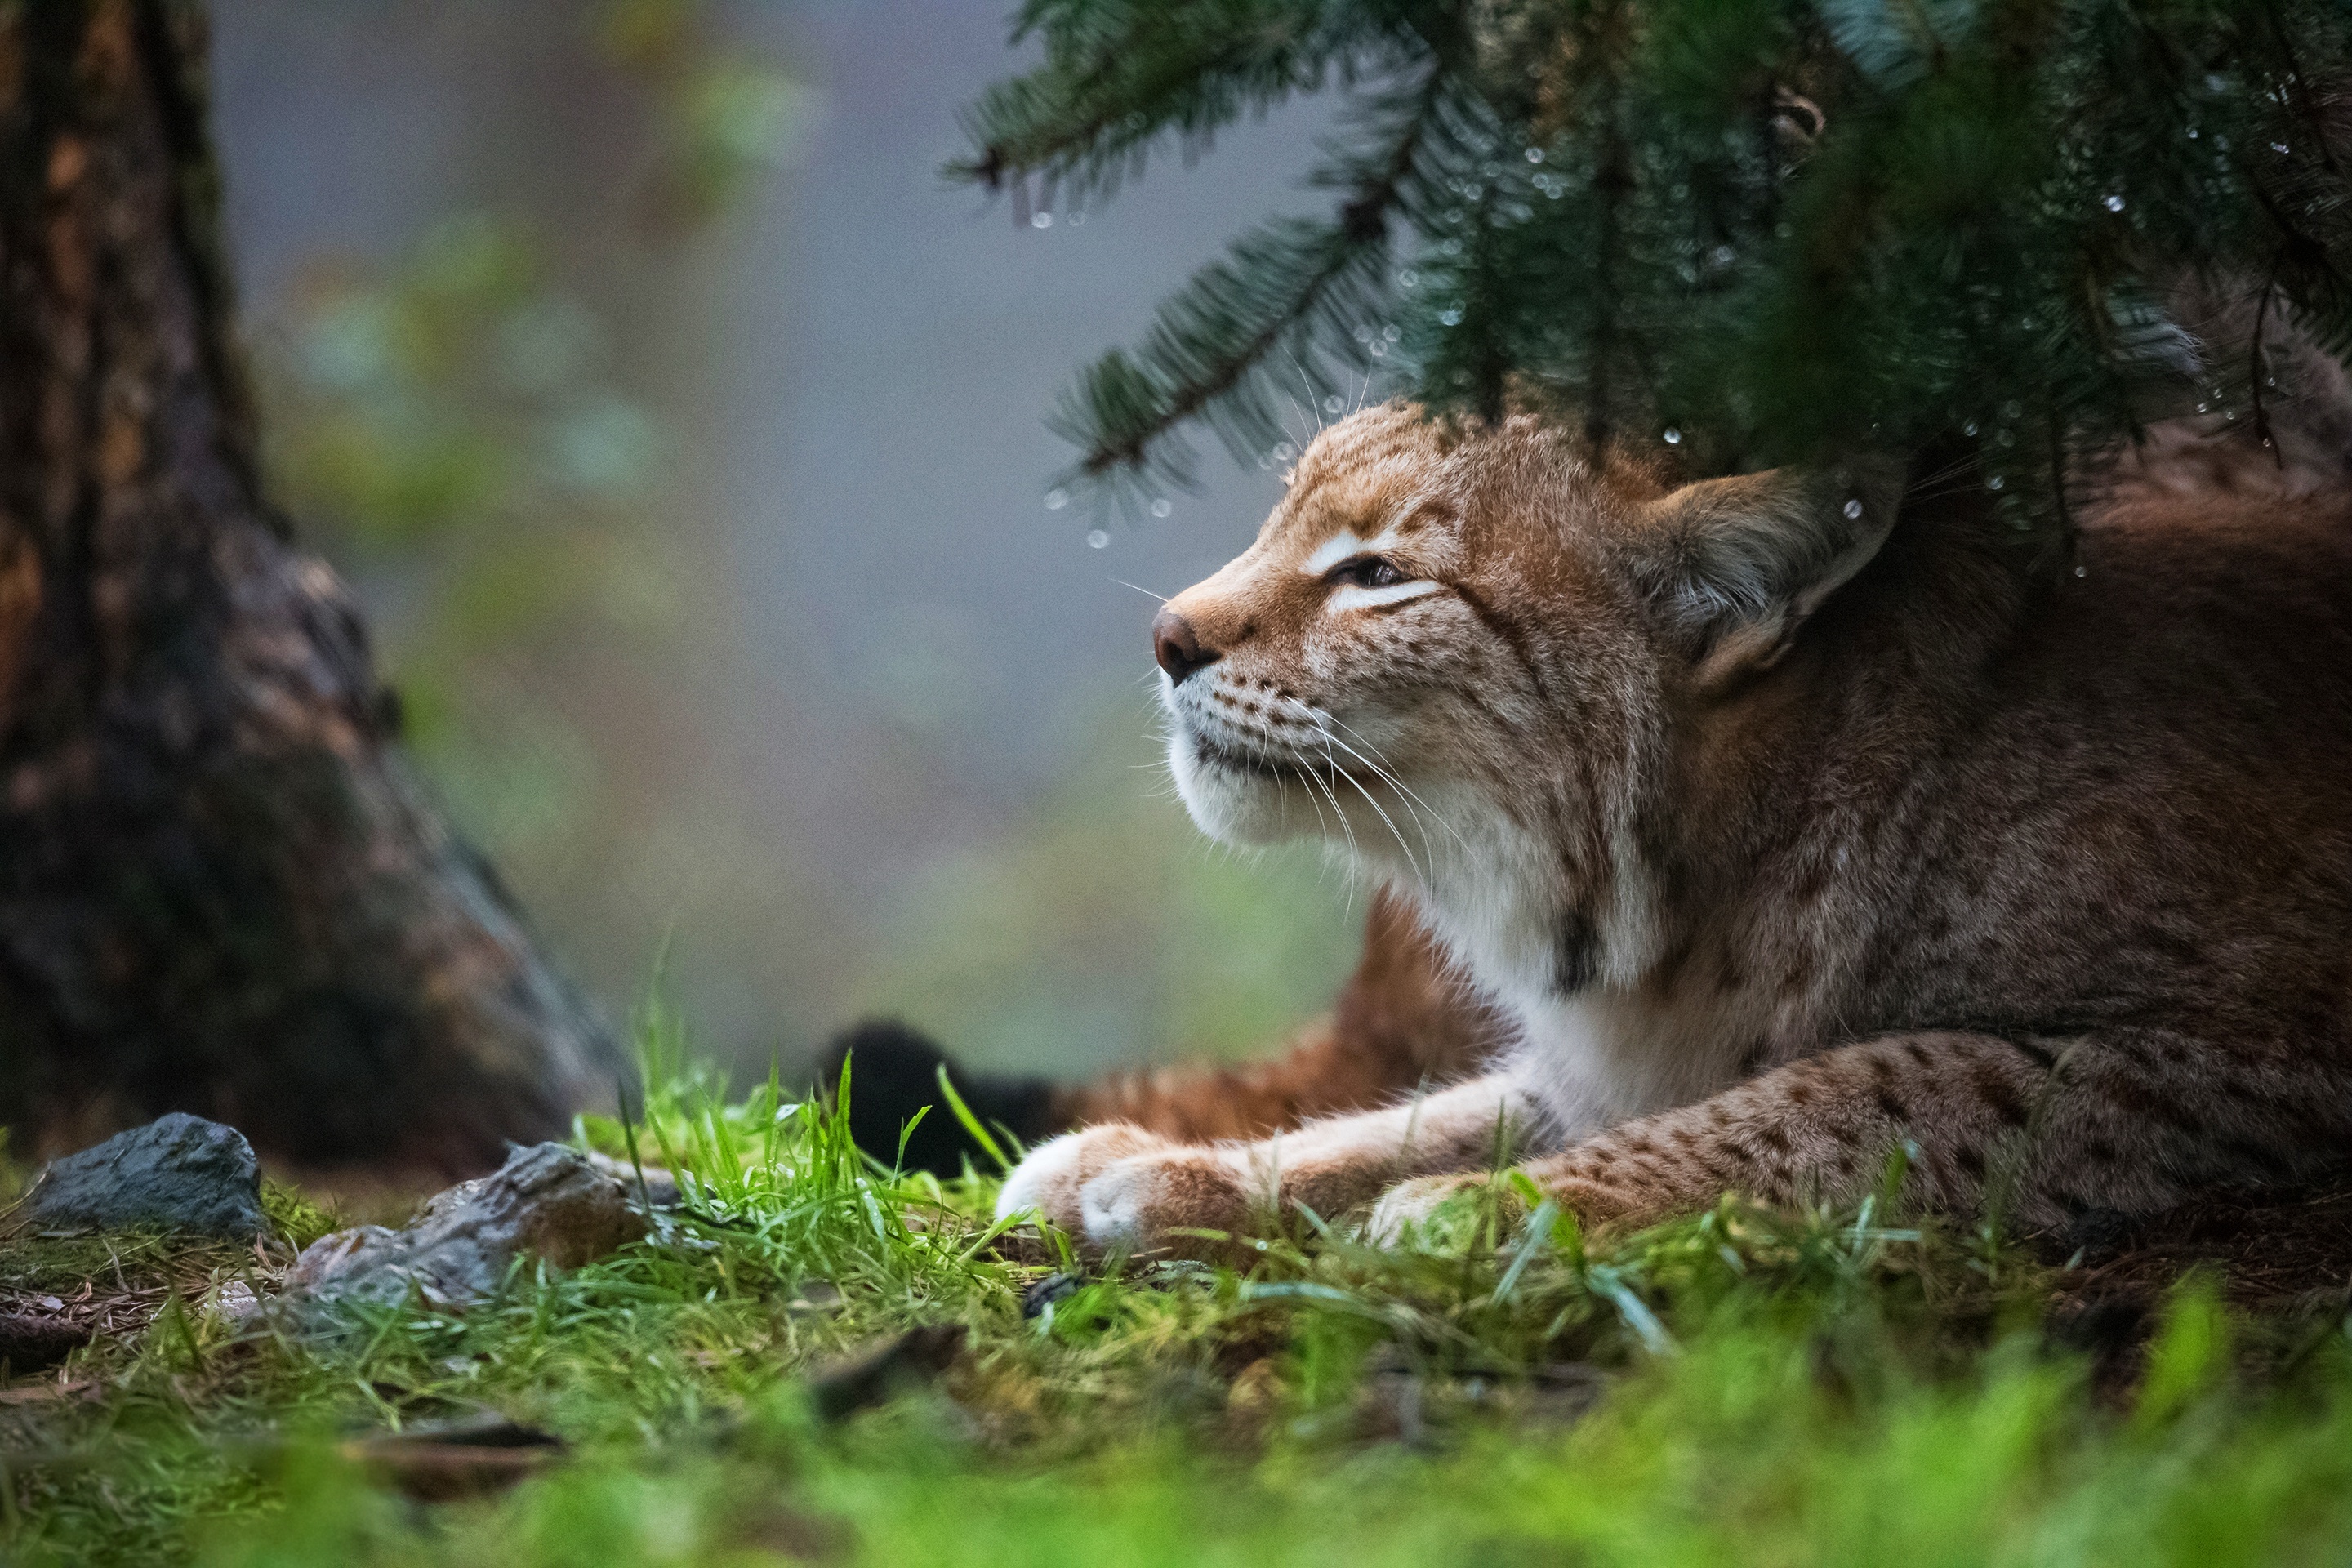 Image: Lynx, cat, wild, lying, forest, spruce, grass, branches